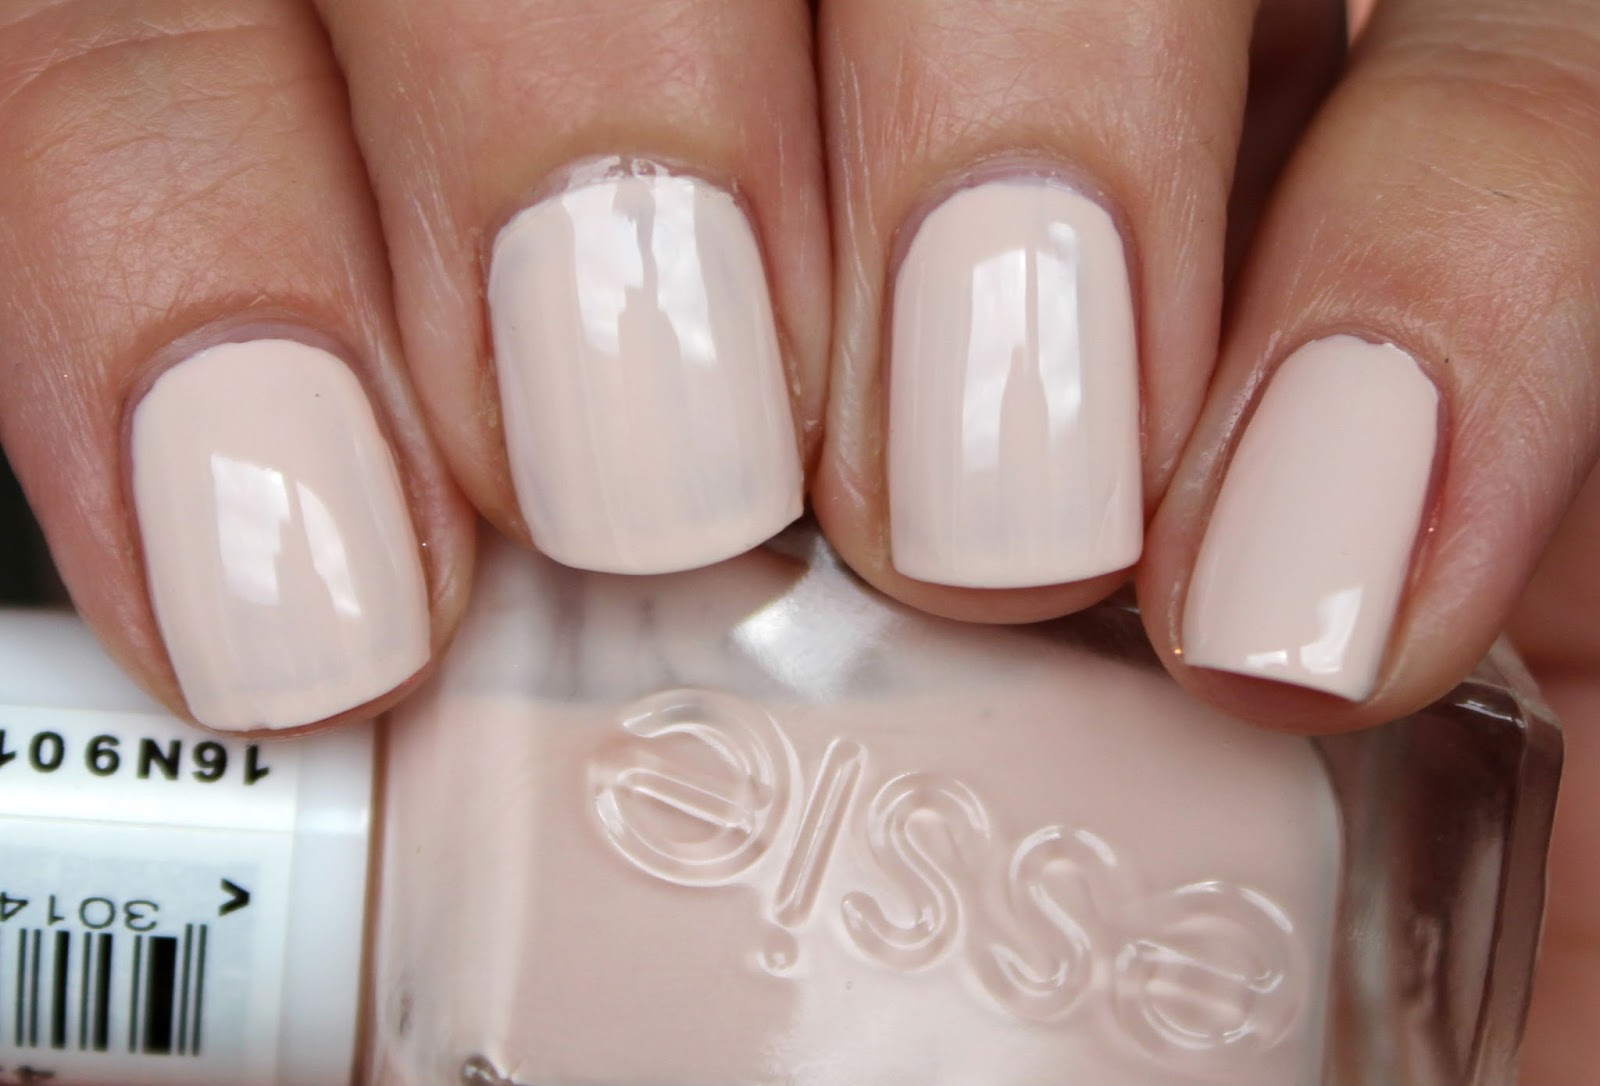 5. Essie Gel Couture Nail Polish in "Lace Me Up" - wide 2